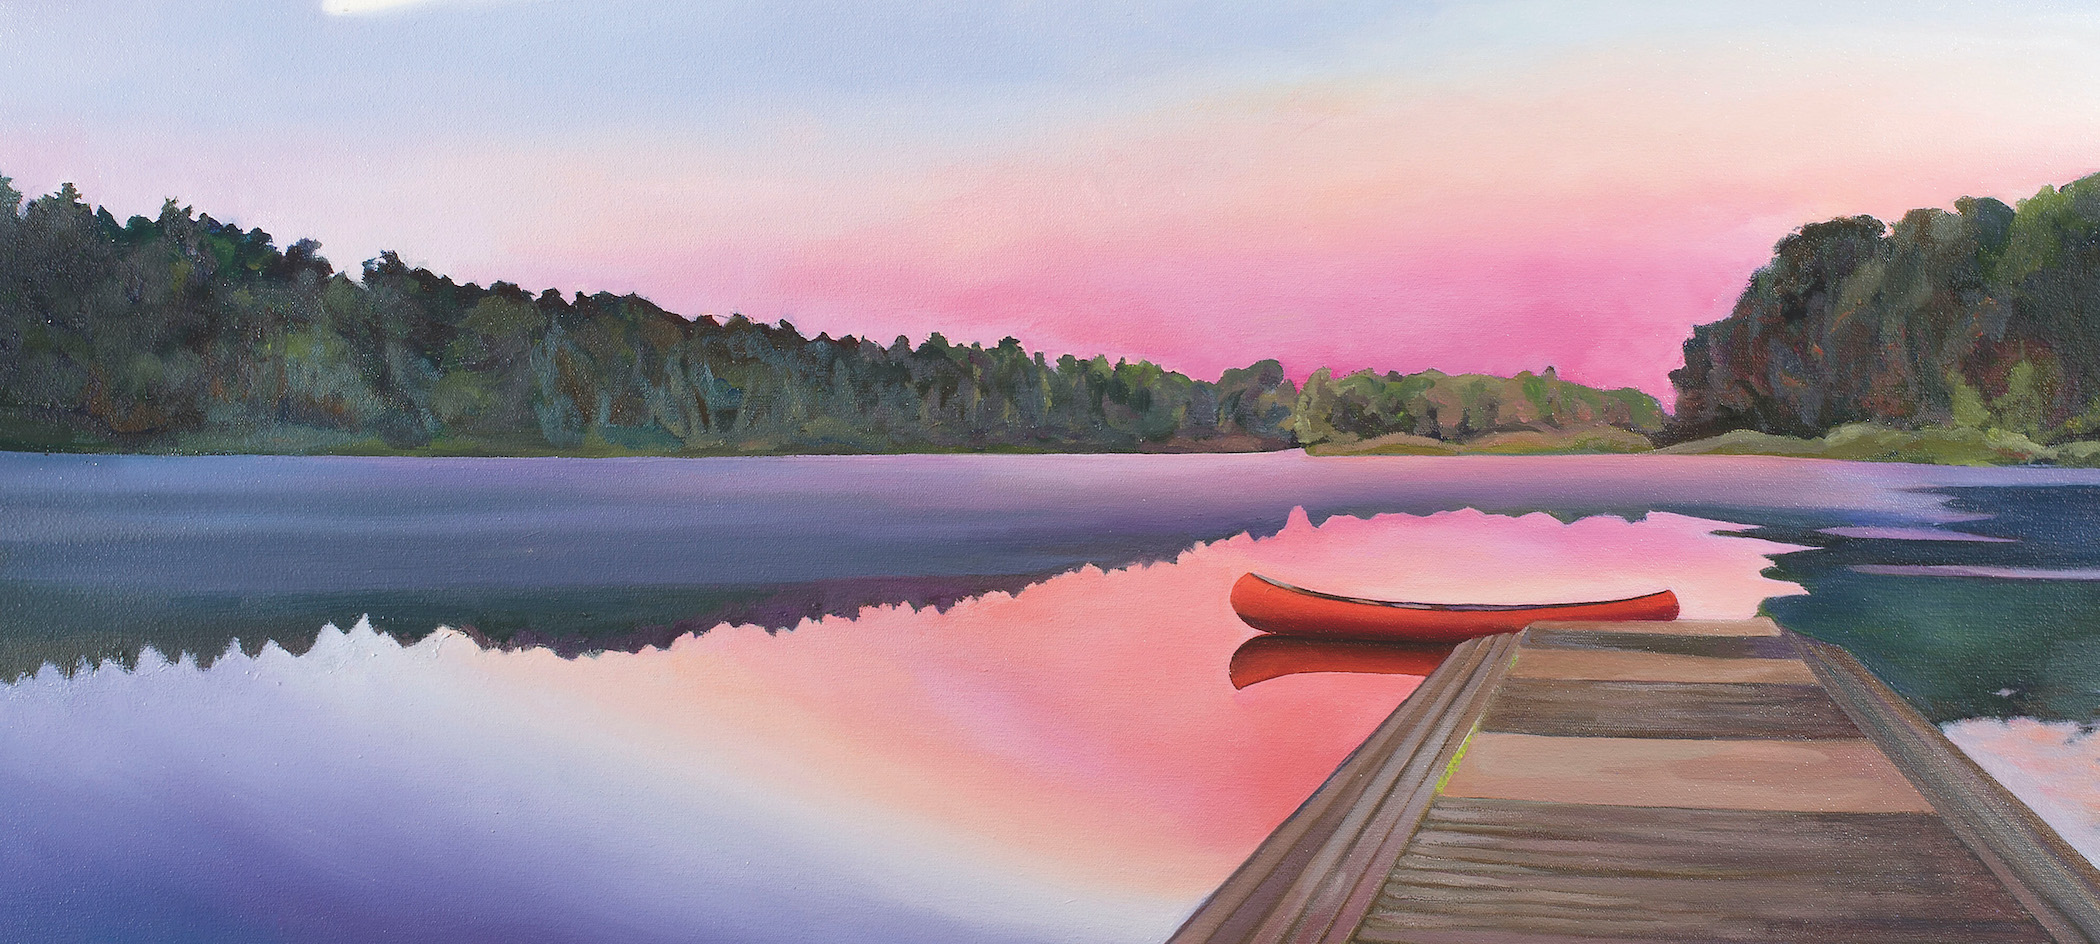 A painting of a canoe in a lake at dusk